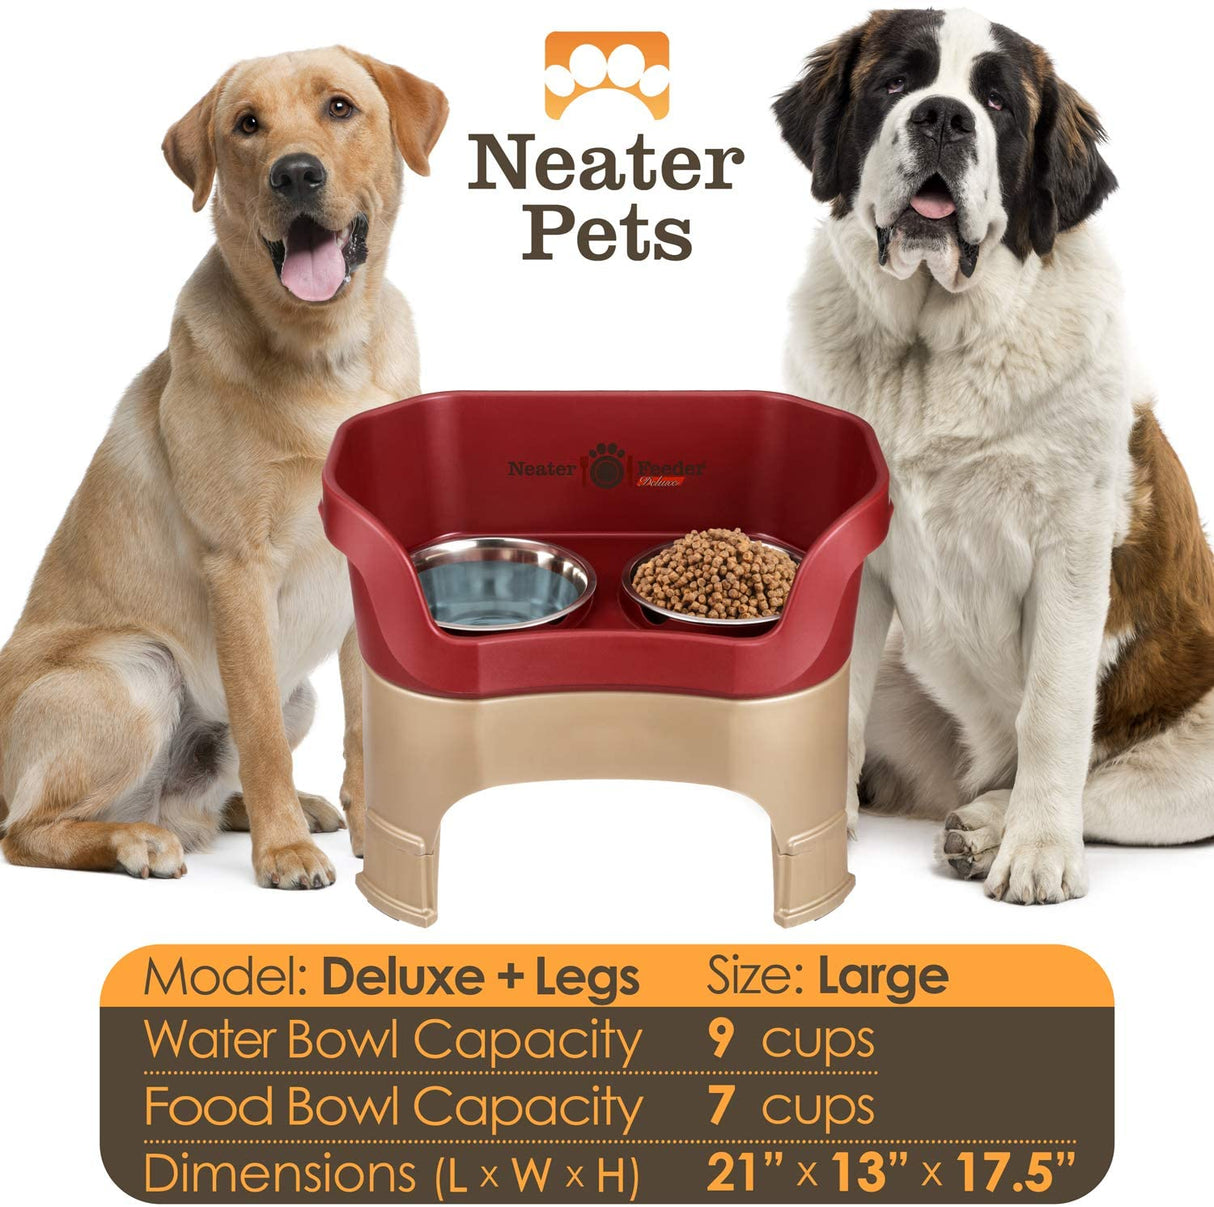 Deluxe large with leg extensions bowl capacity and dimensions